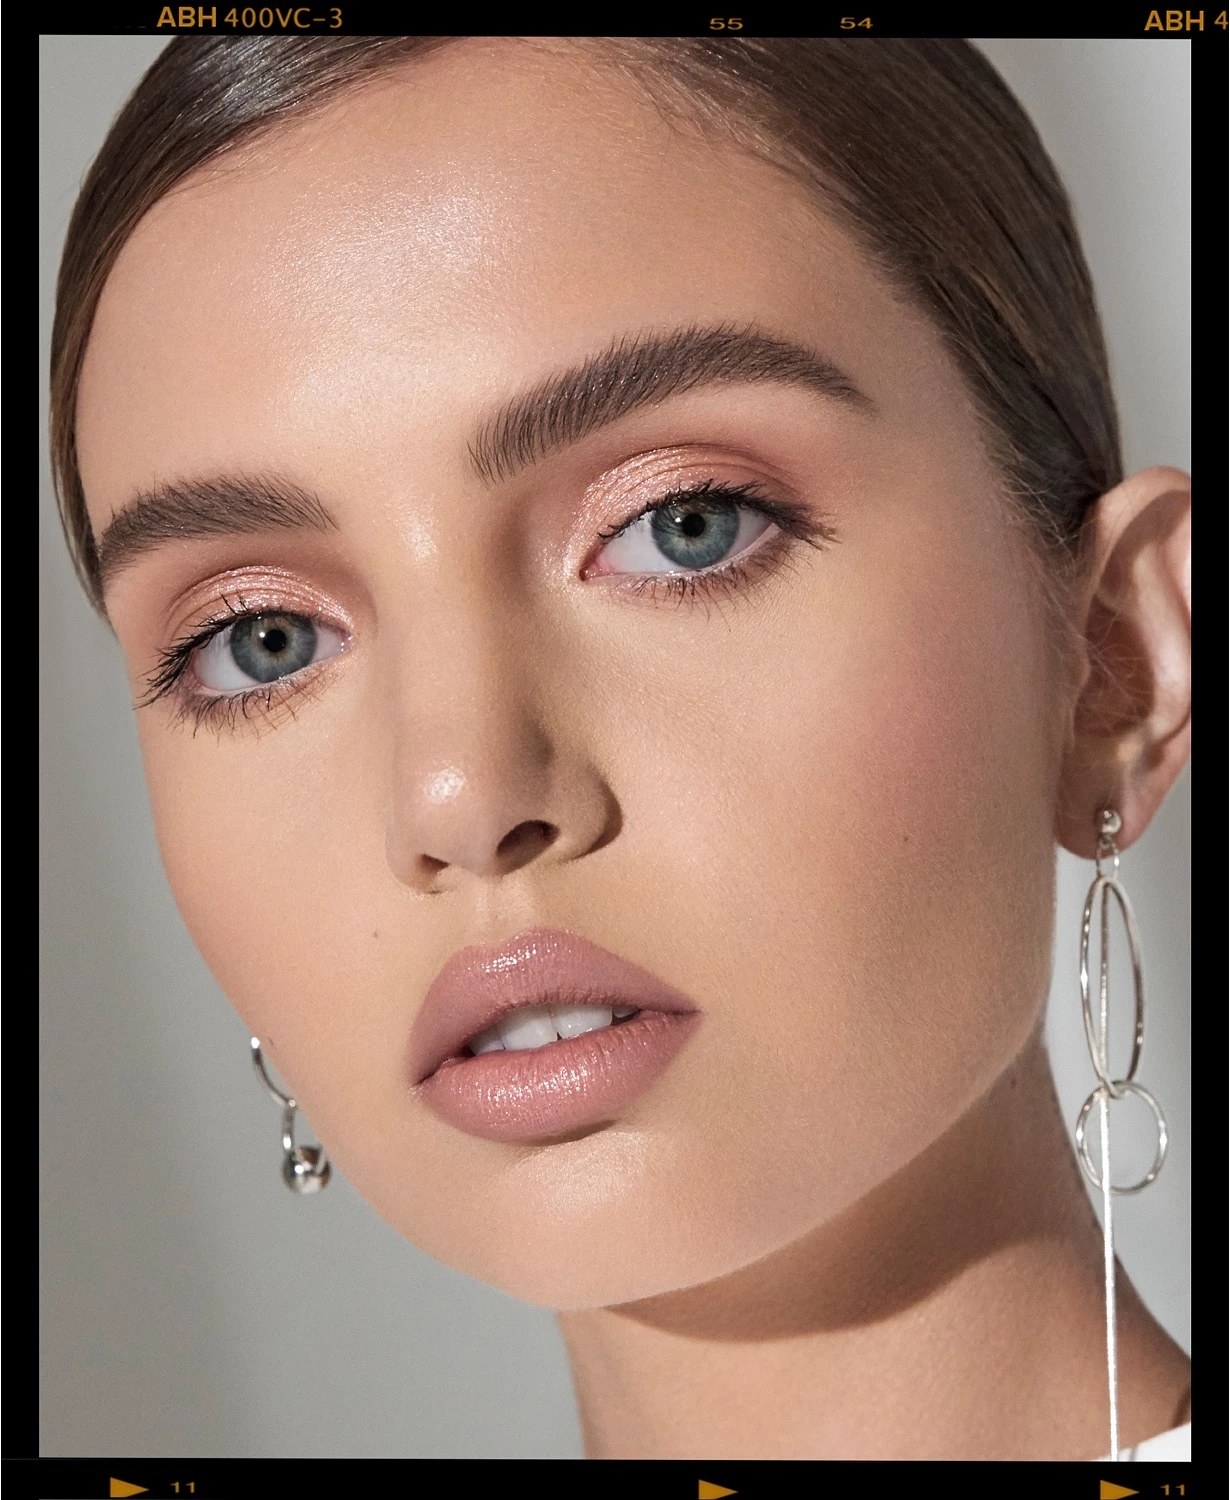 Model wearing eyebrow gel and full face of neutral makeup